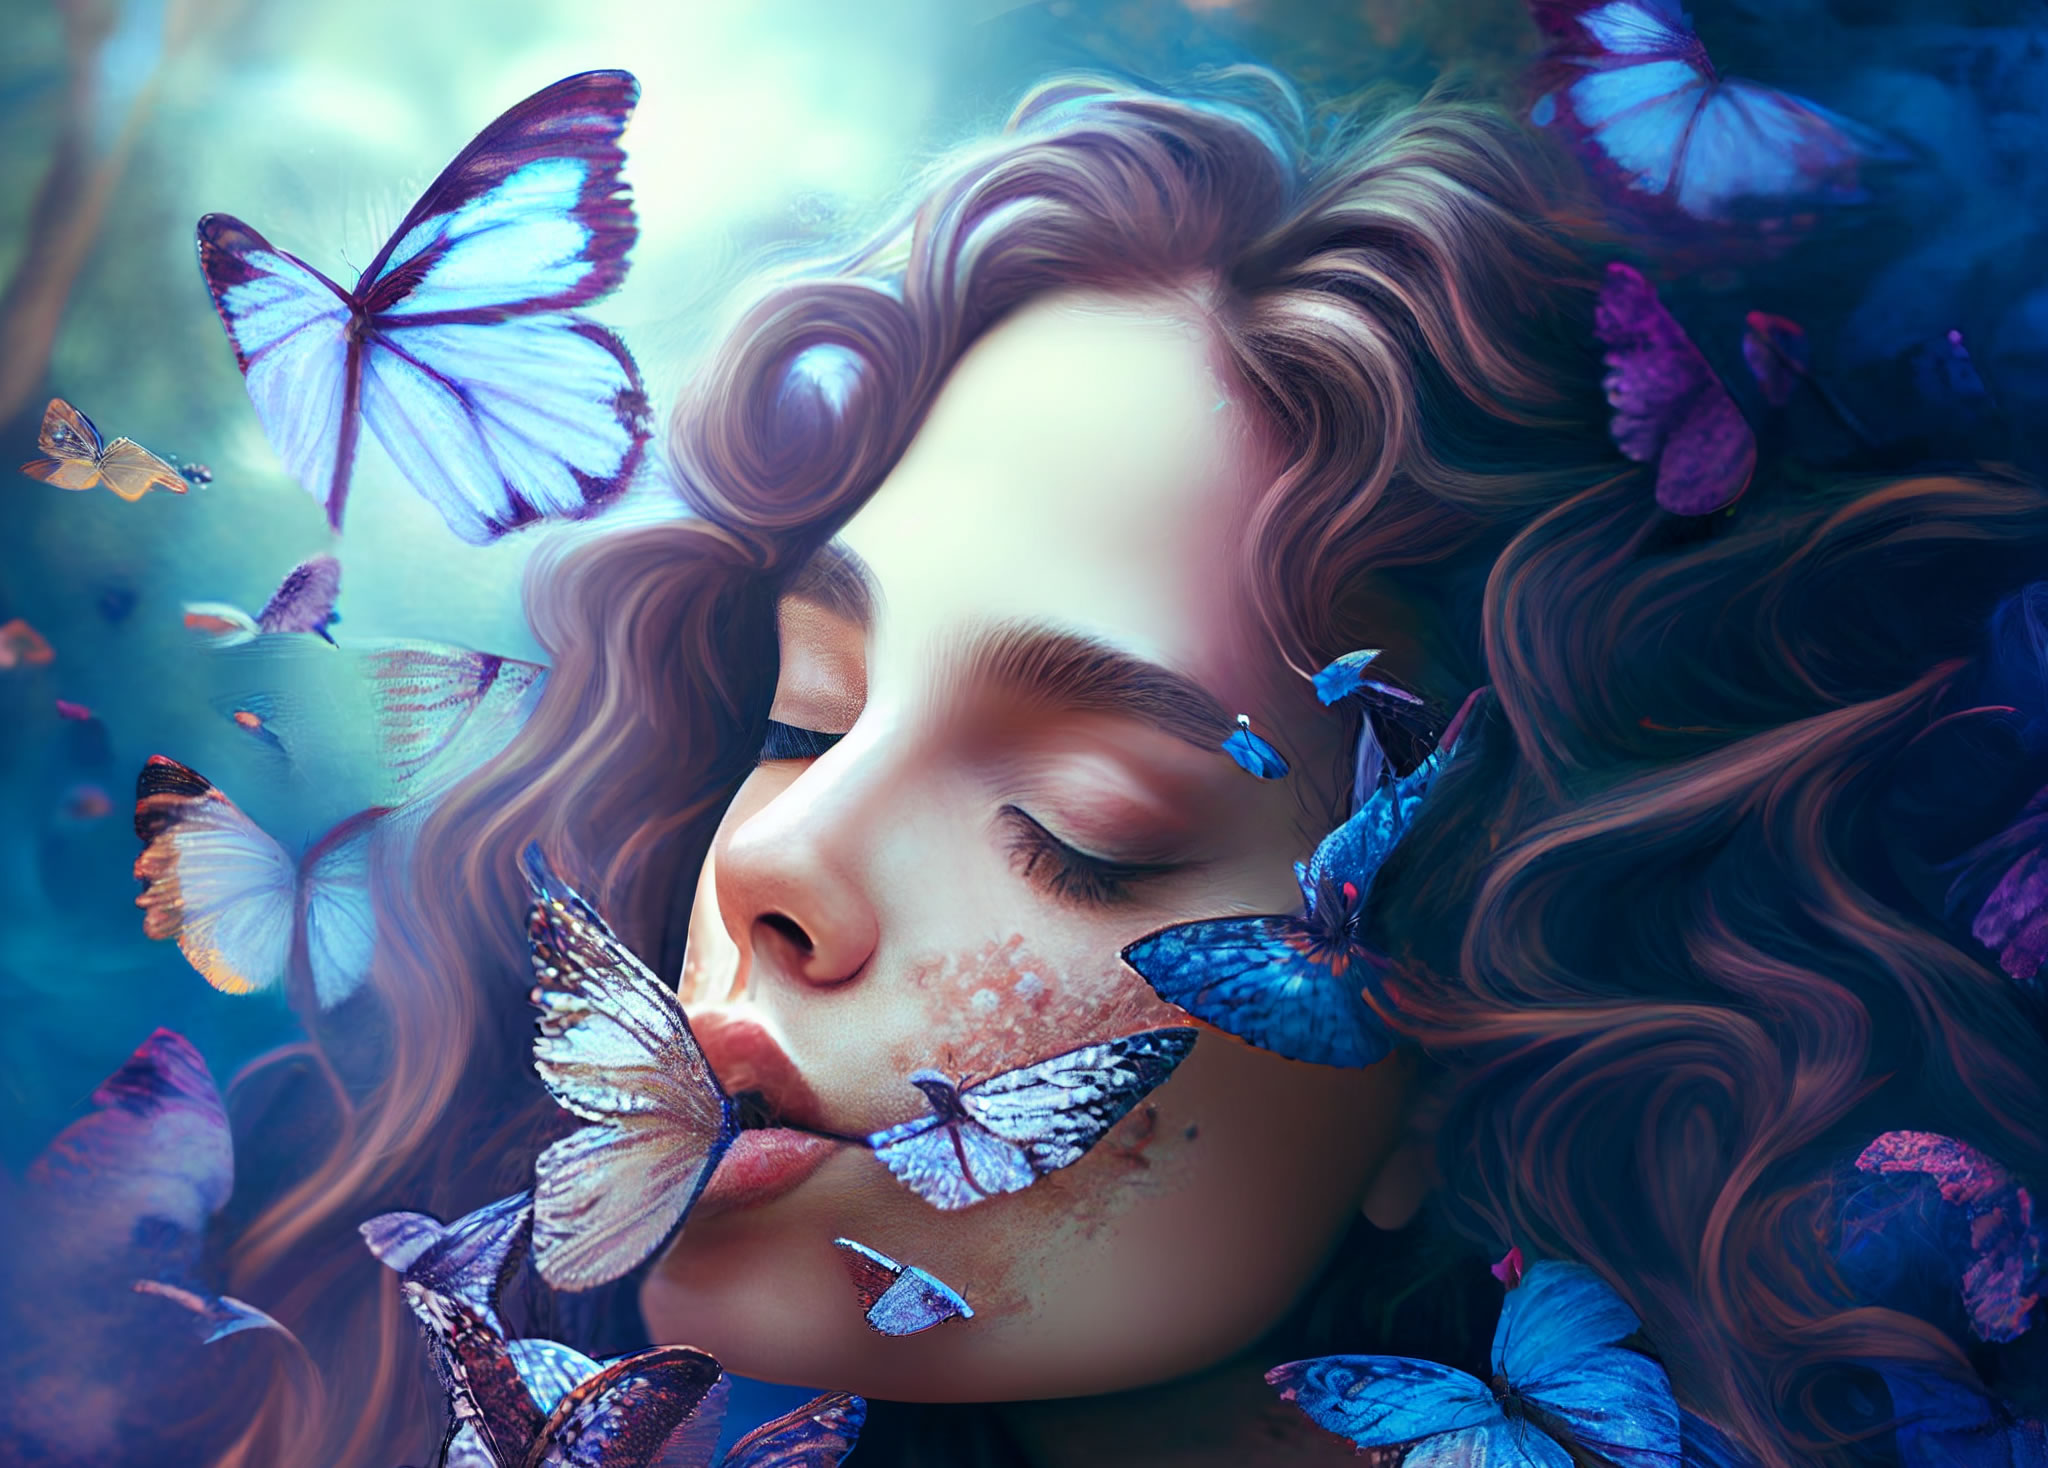 Healing Light butterfly kisses Free Image